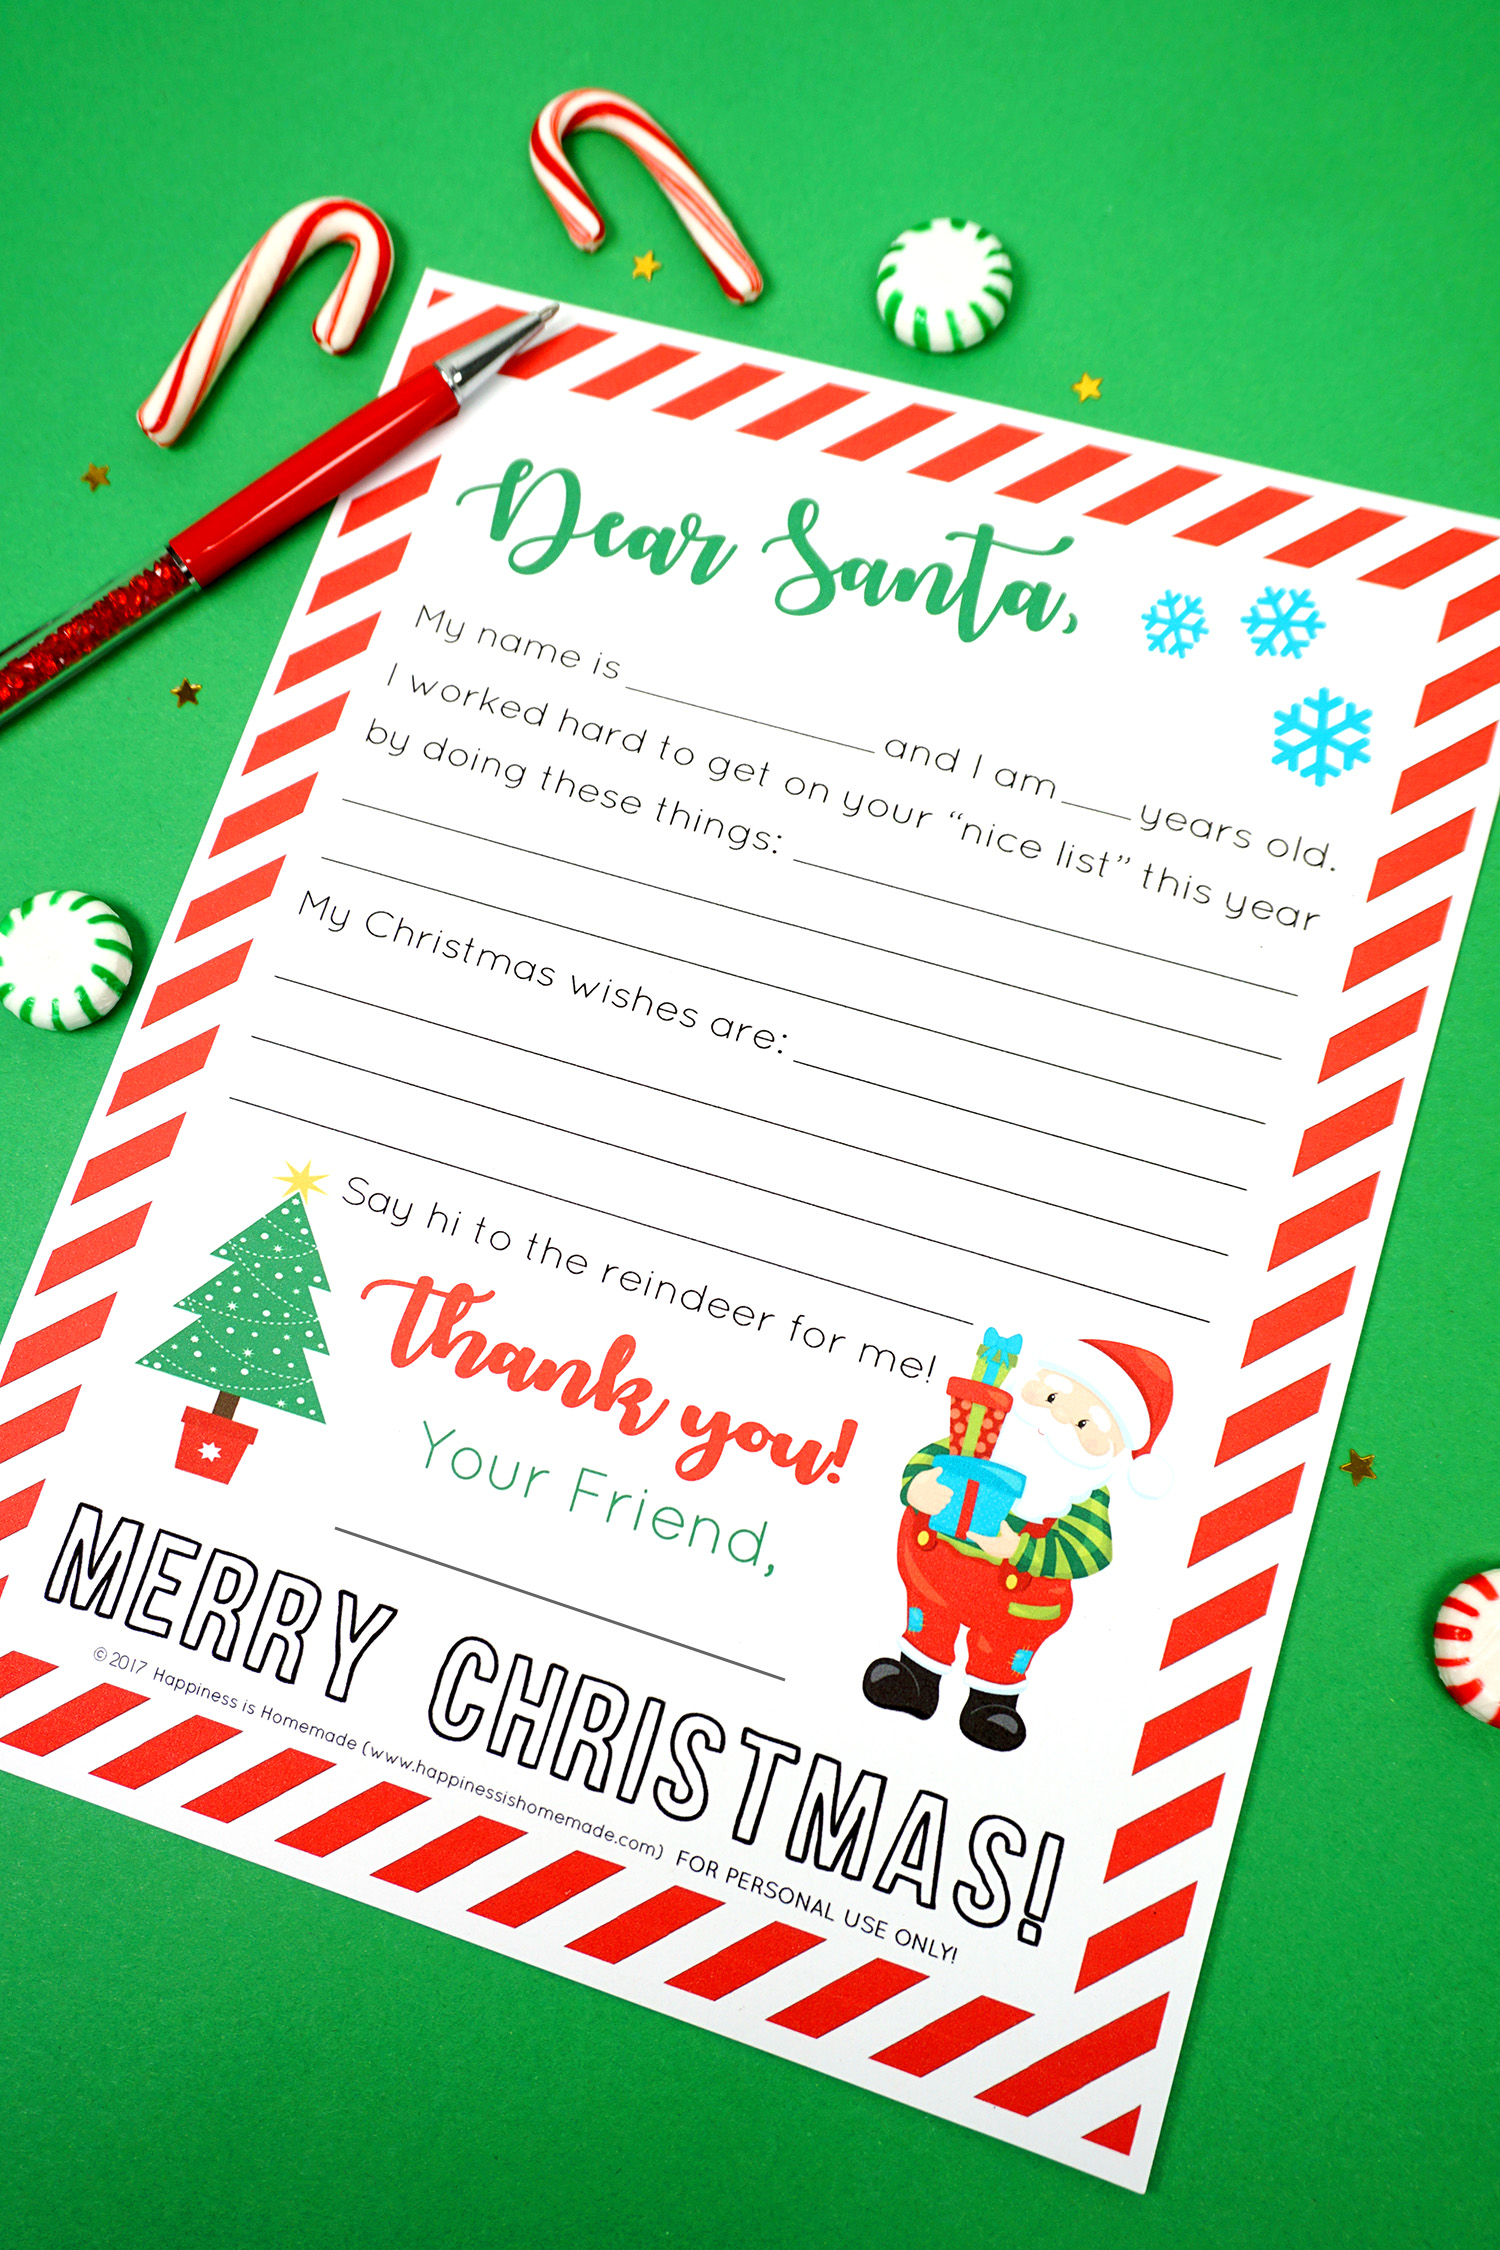 free-printable-letter-to-santa-happiness-is-homemade